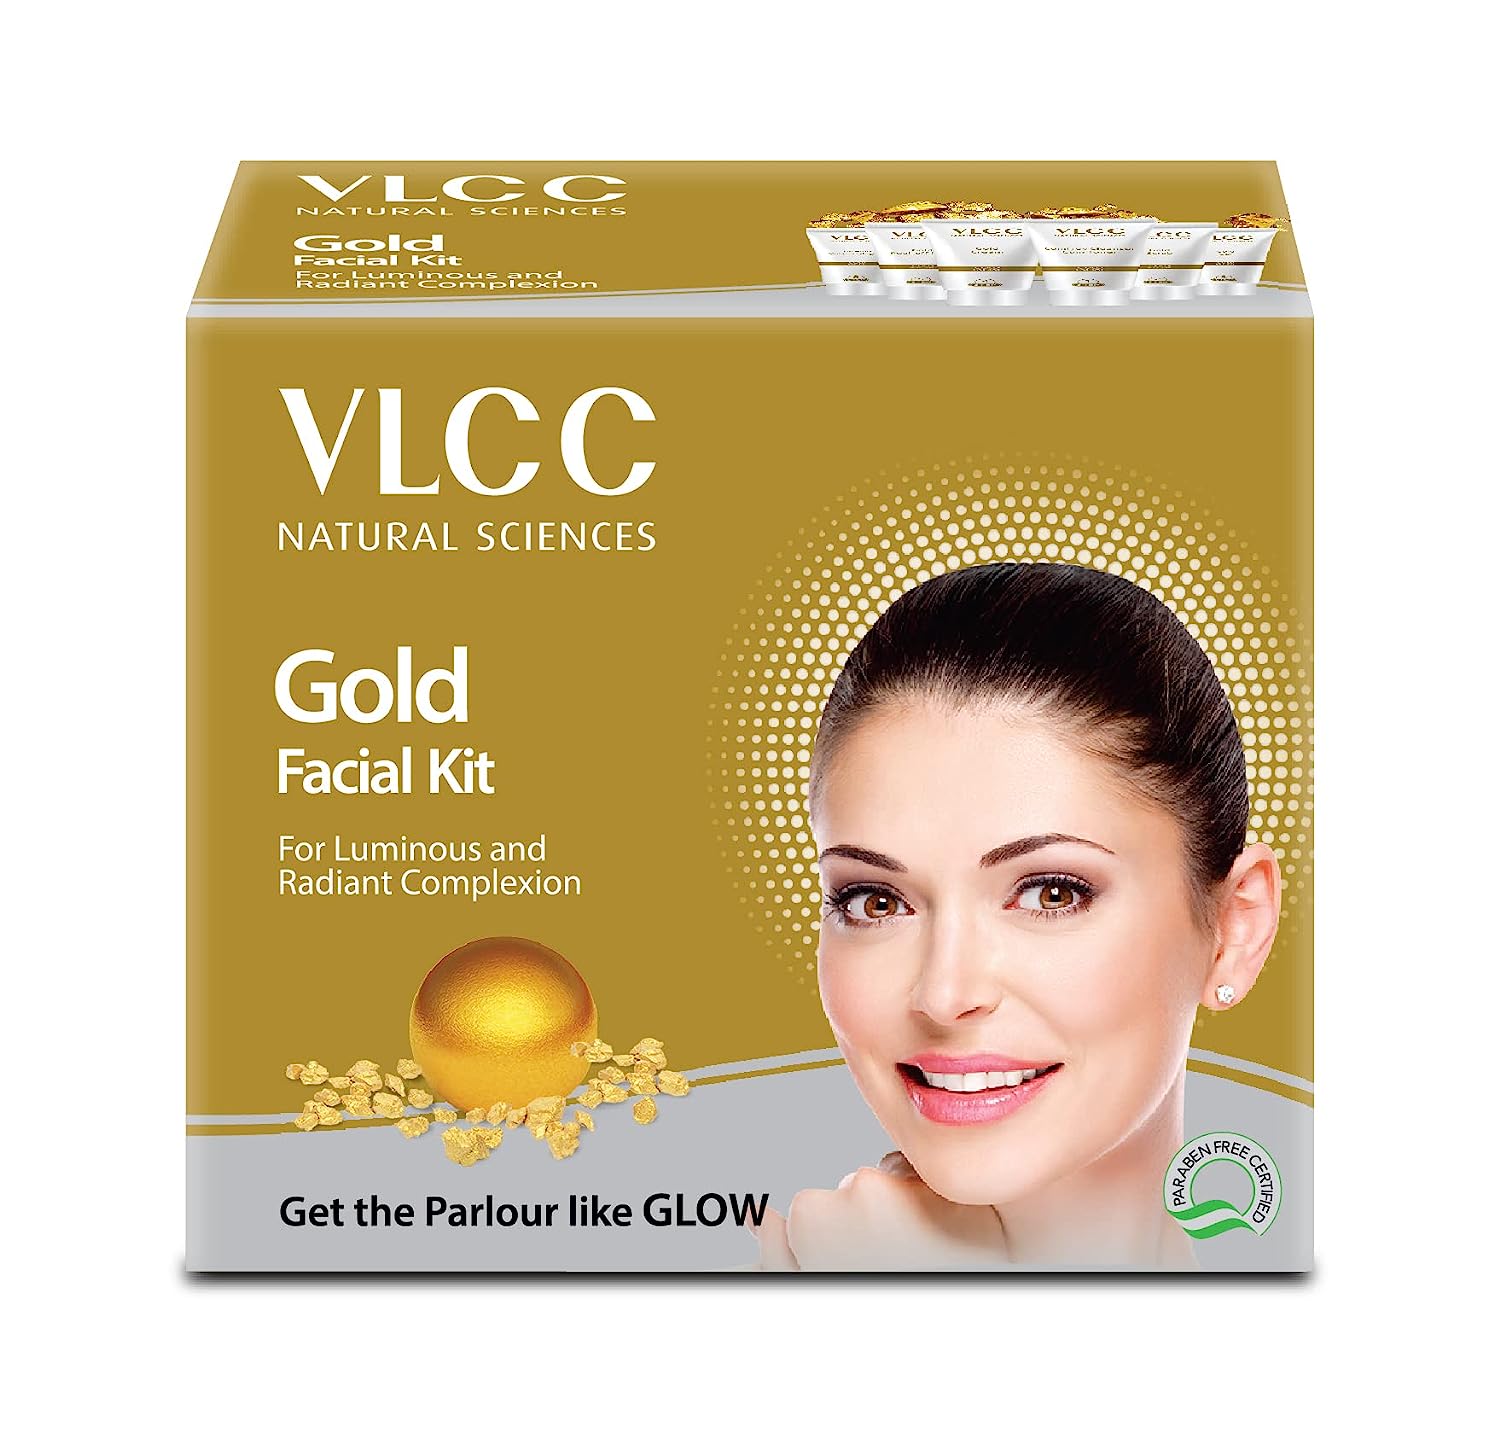 VLCC Natural Sciences Gold Facial Kit for Luminous and Radiant Complexion 60g